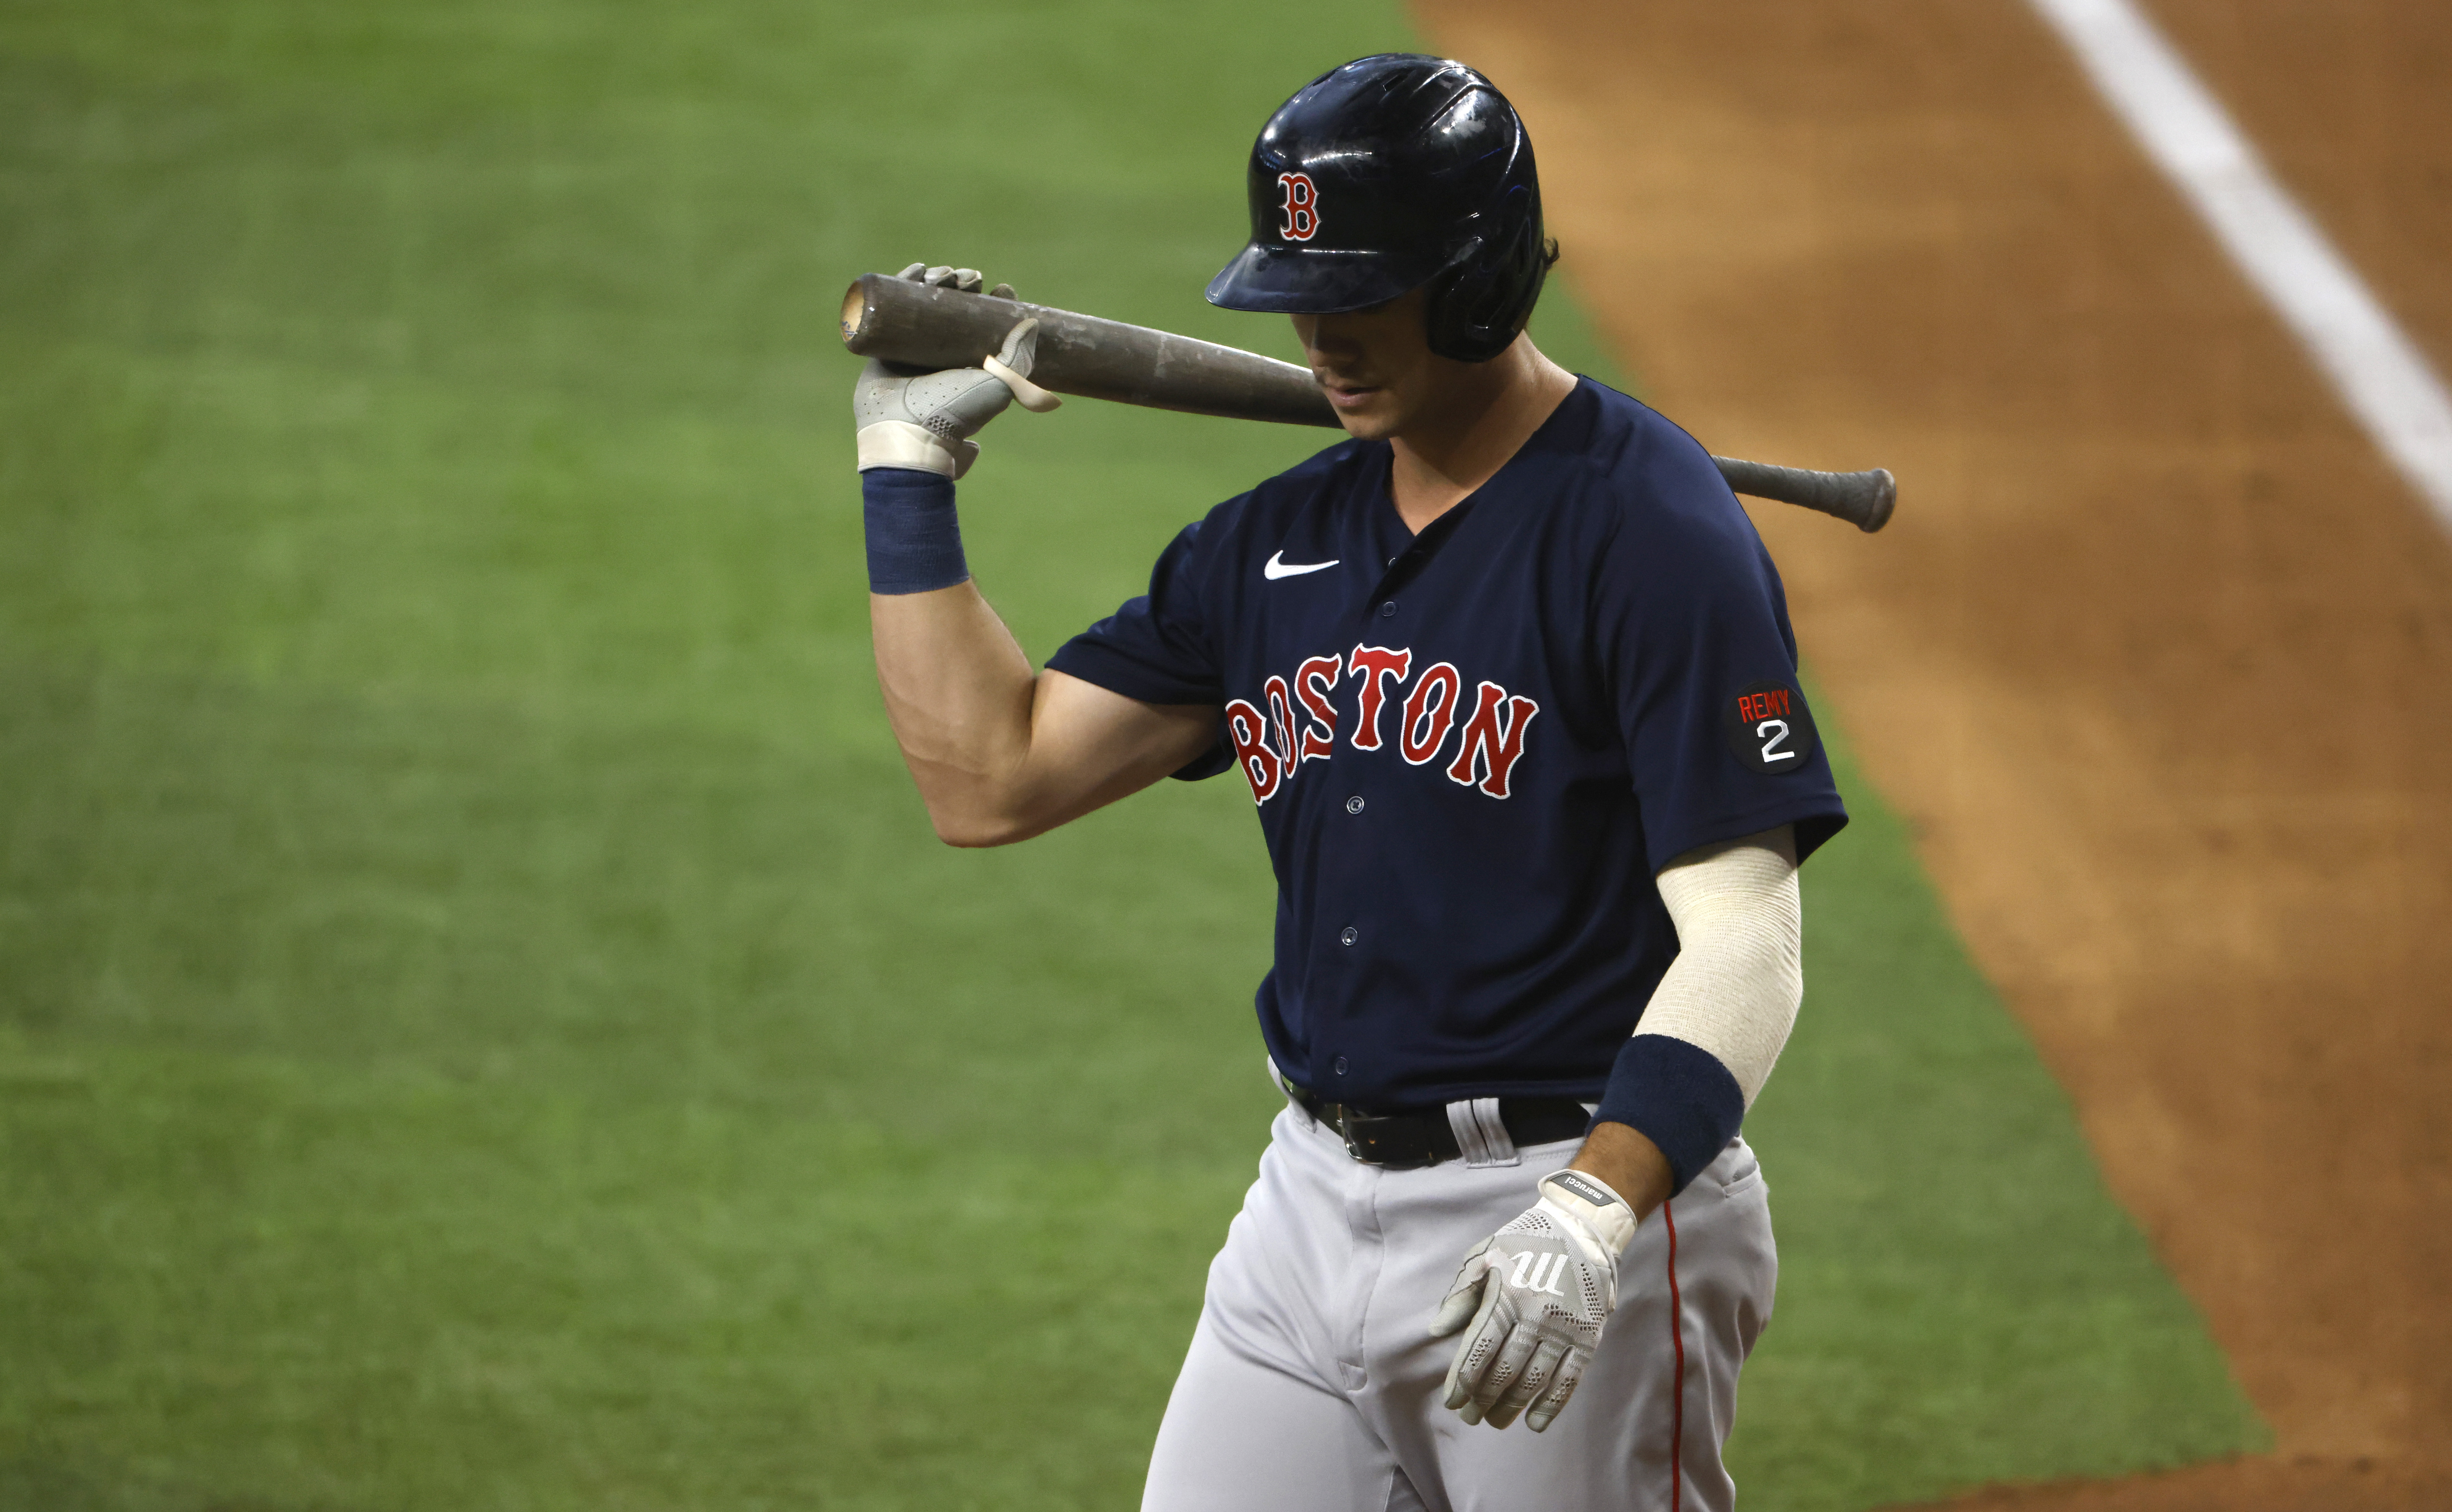 The Red Sox aren't getting much offense from their first basemen